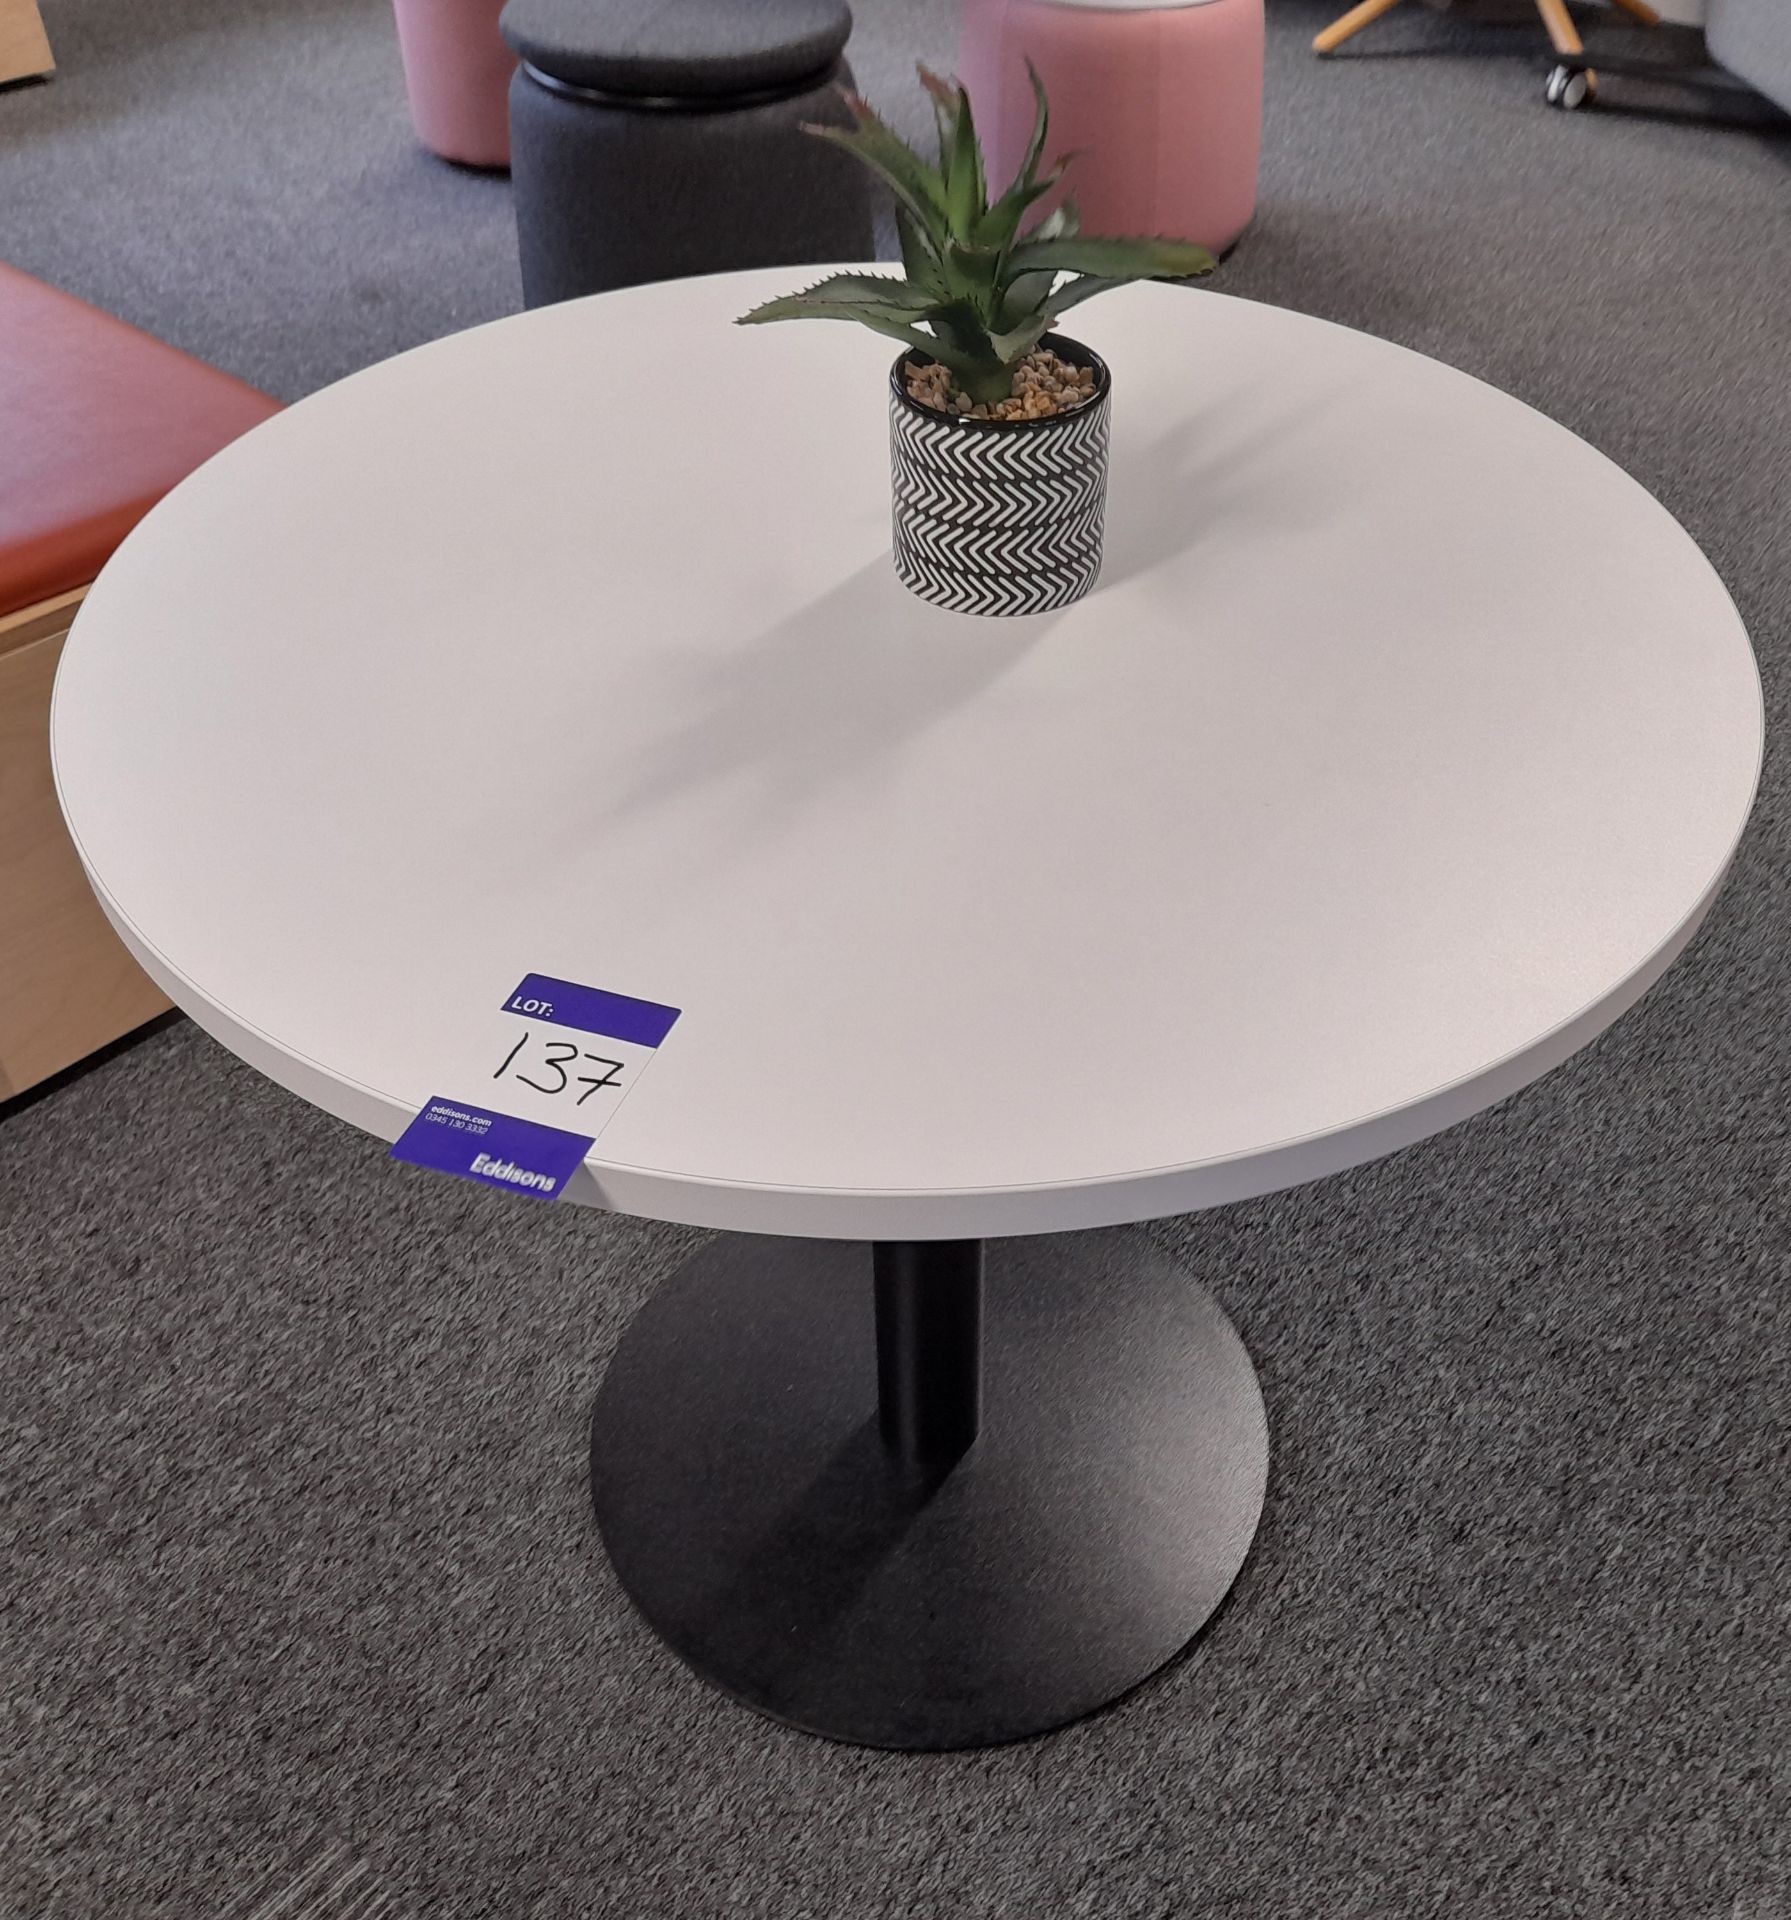 Dams Furniture Monza circular dining table with flat round steel base (Approx. 800mm) (Location